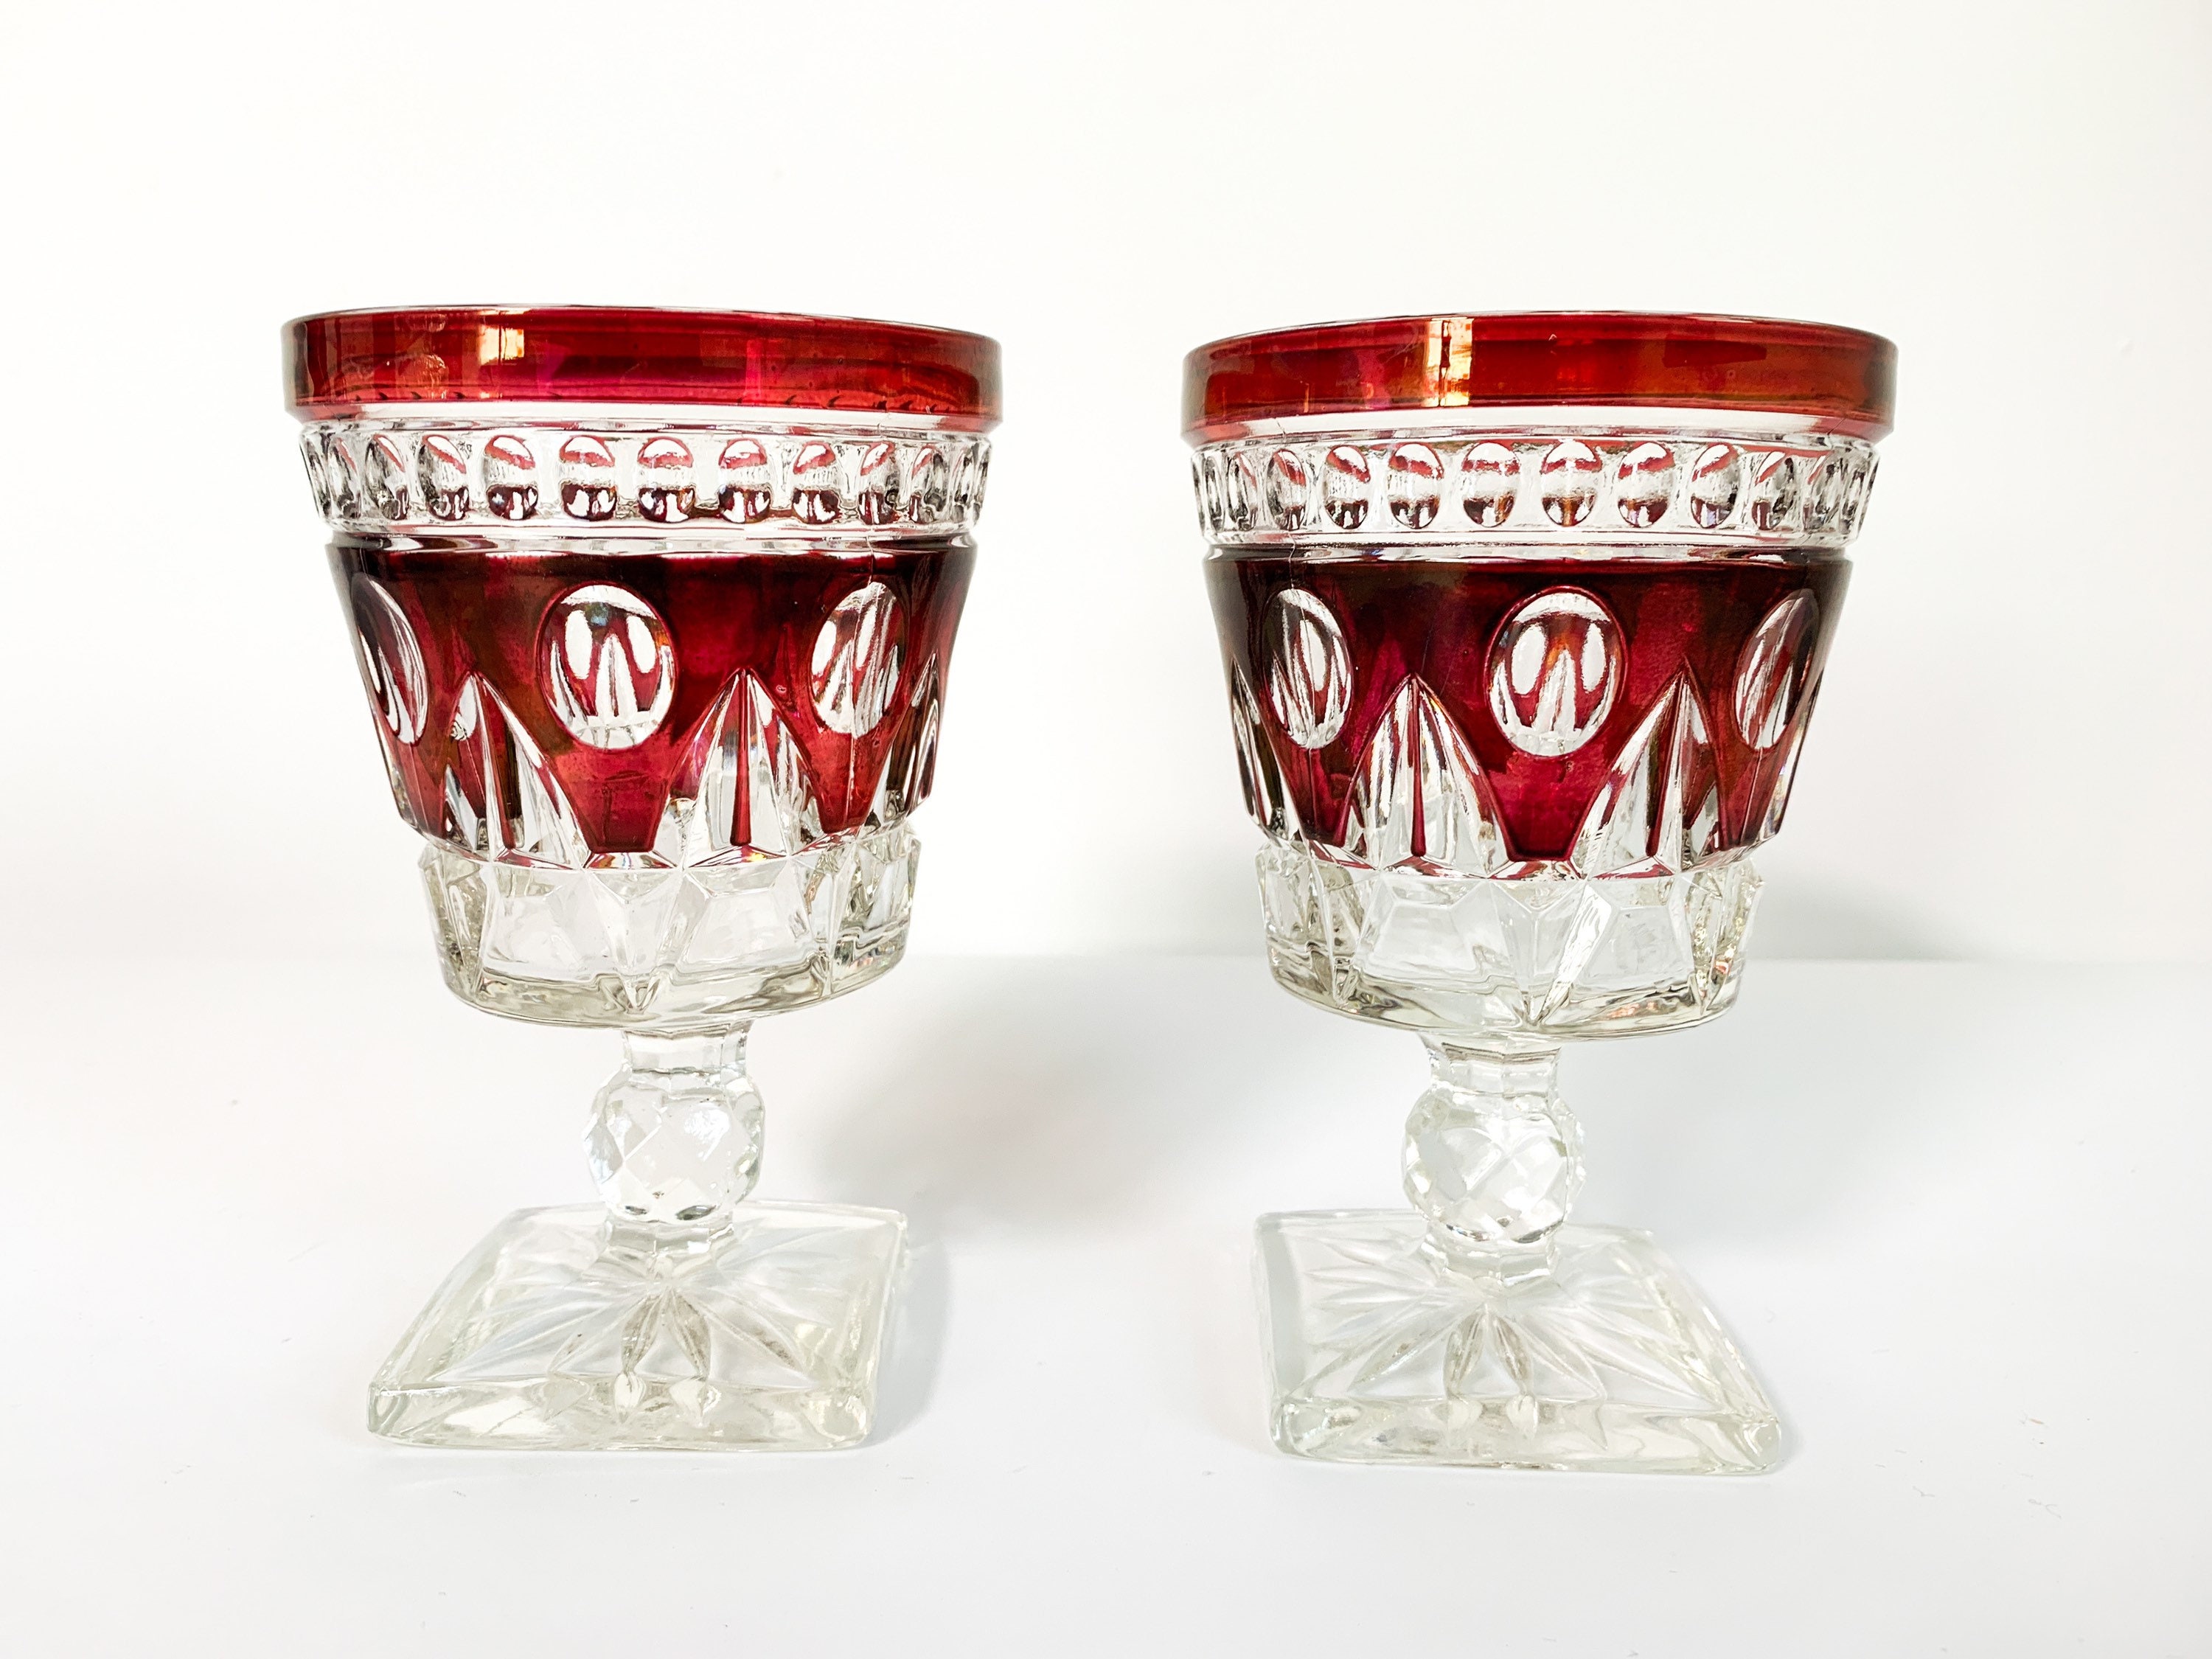 ANTIQUE INDIANA GLASSWARE, BEAUTIFUL RUBY RED GOBLETS